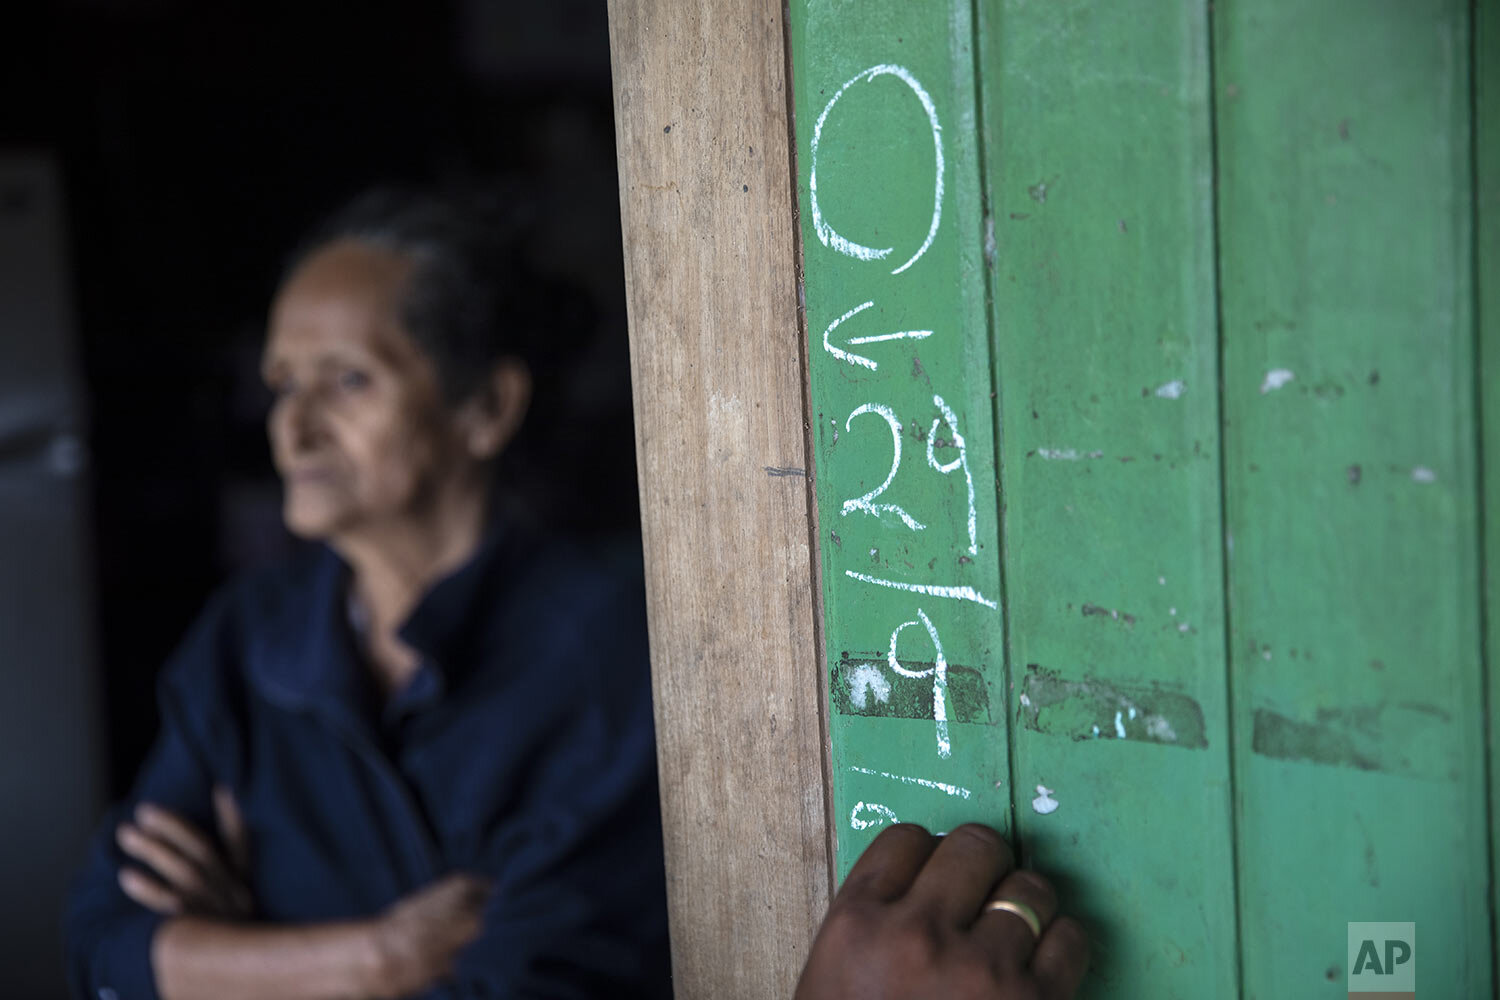  Leila Ramirez, who is suffering from dengue, stands in her doorway as a member of the campaign against dengue documents their visit on the wood siding of her home, in Pucallpa, n PeruÕs Ucayali region, Tuesday, Sept. 29, 2020. Five members in Ramire